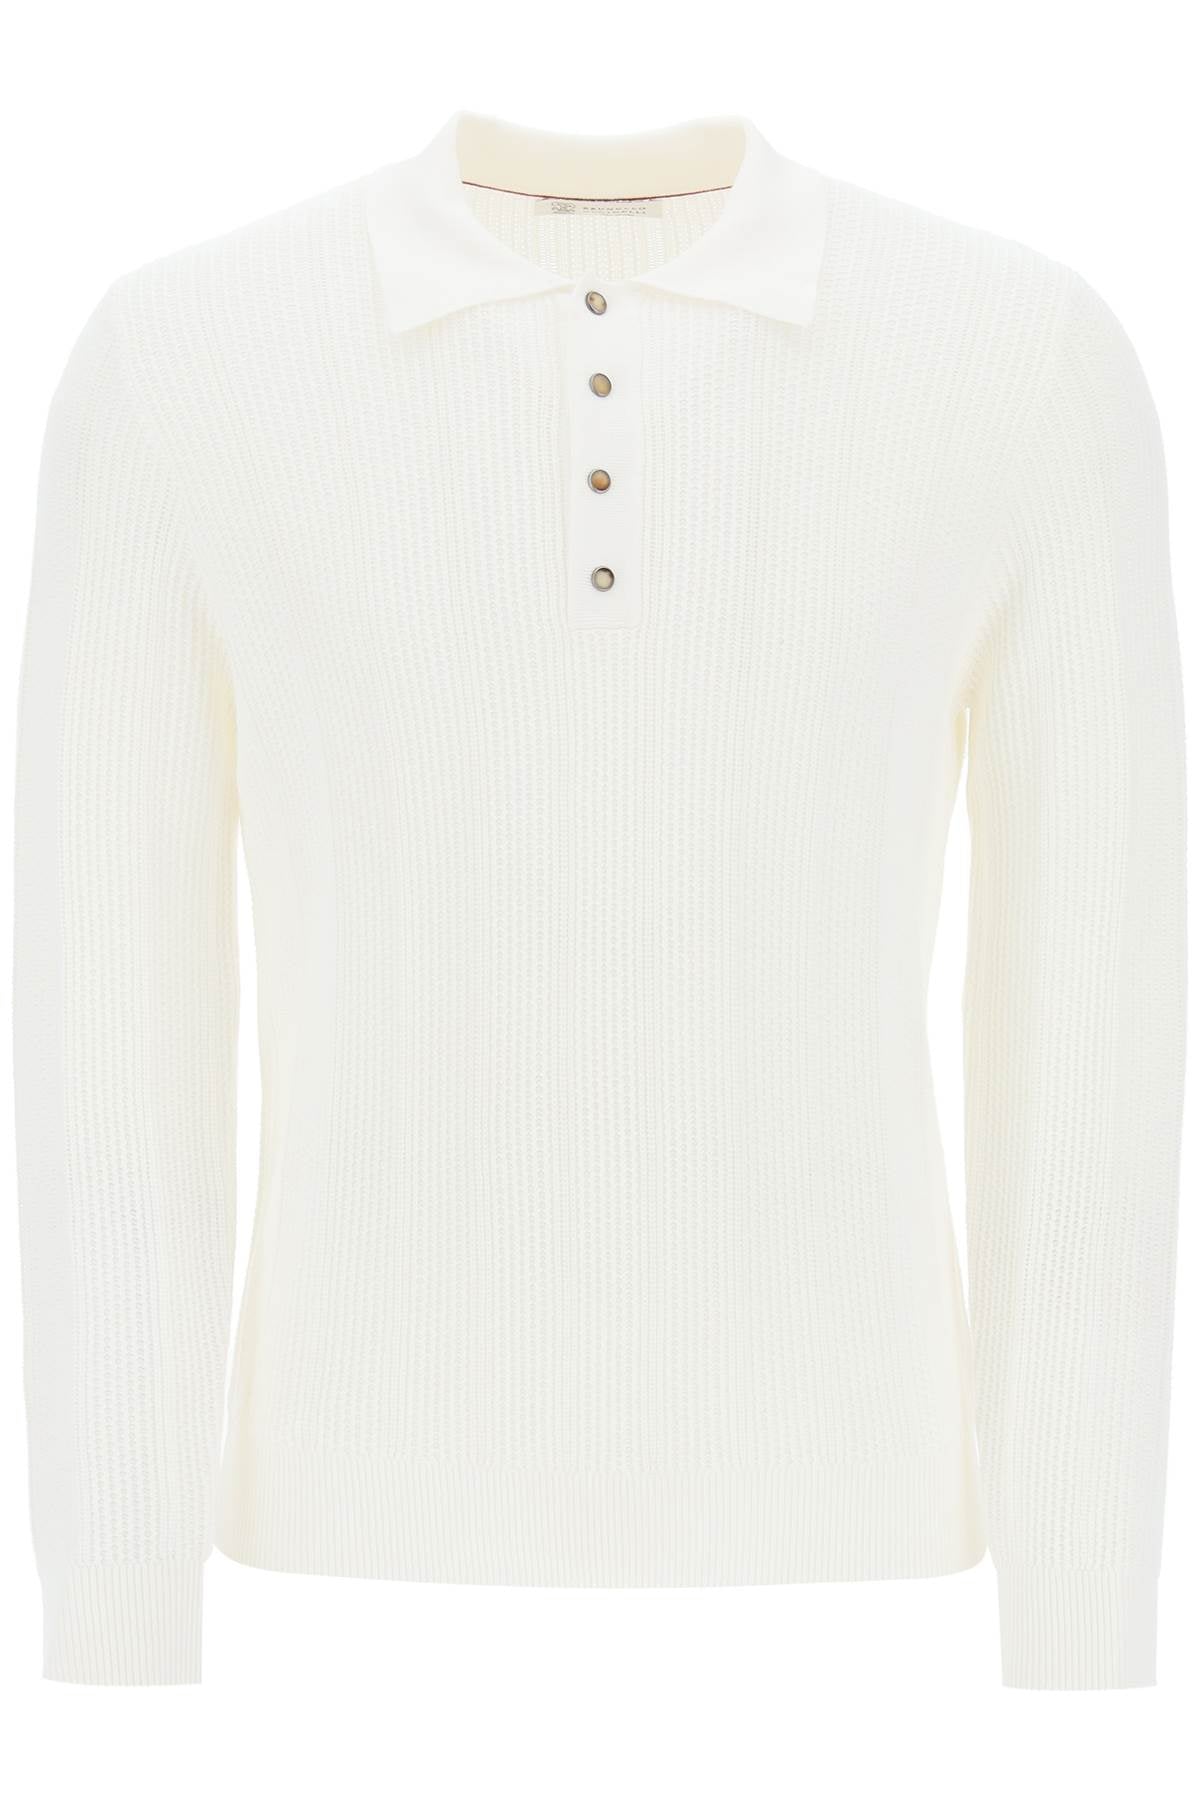 Brunello cucinelli long-sleeved knitted polo shirt-0